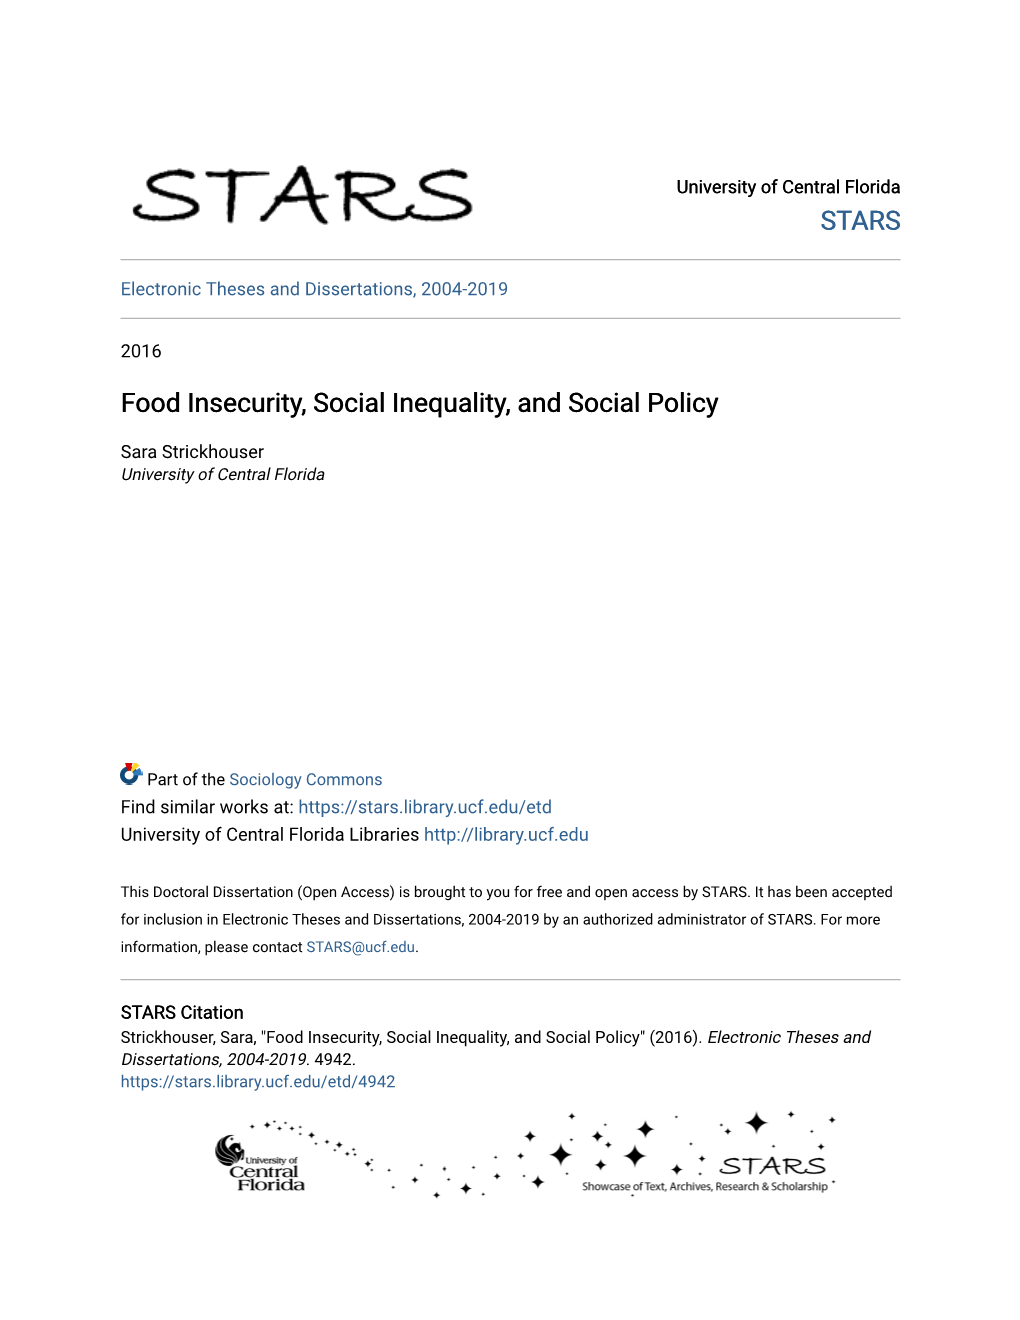 Food Insecurity, Social Inequality, and Social Policy